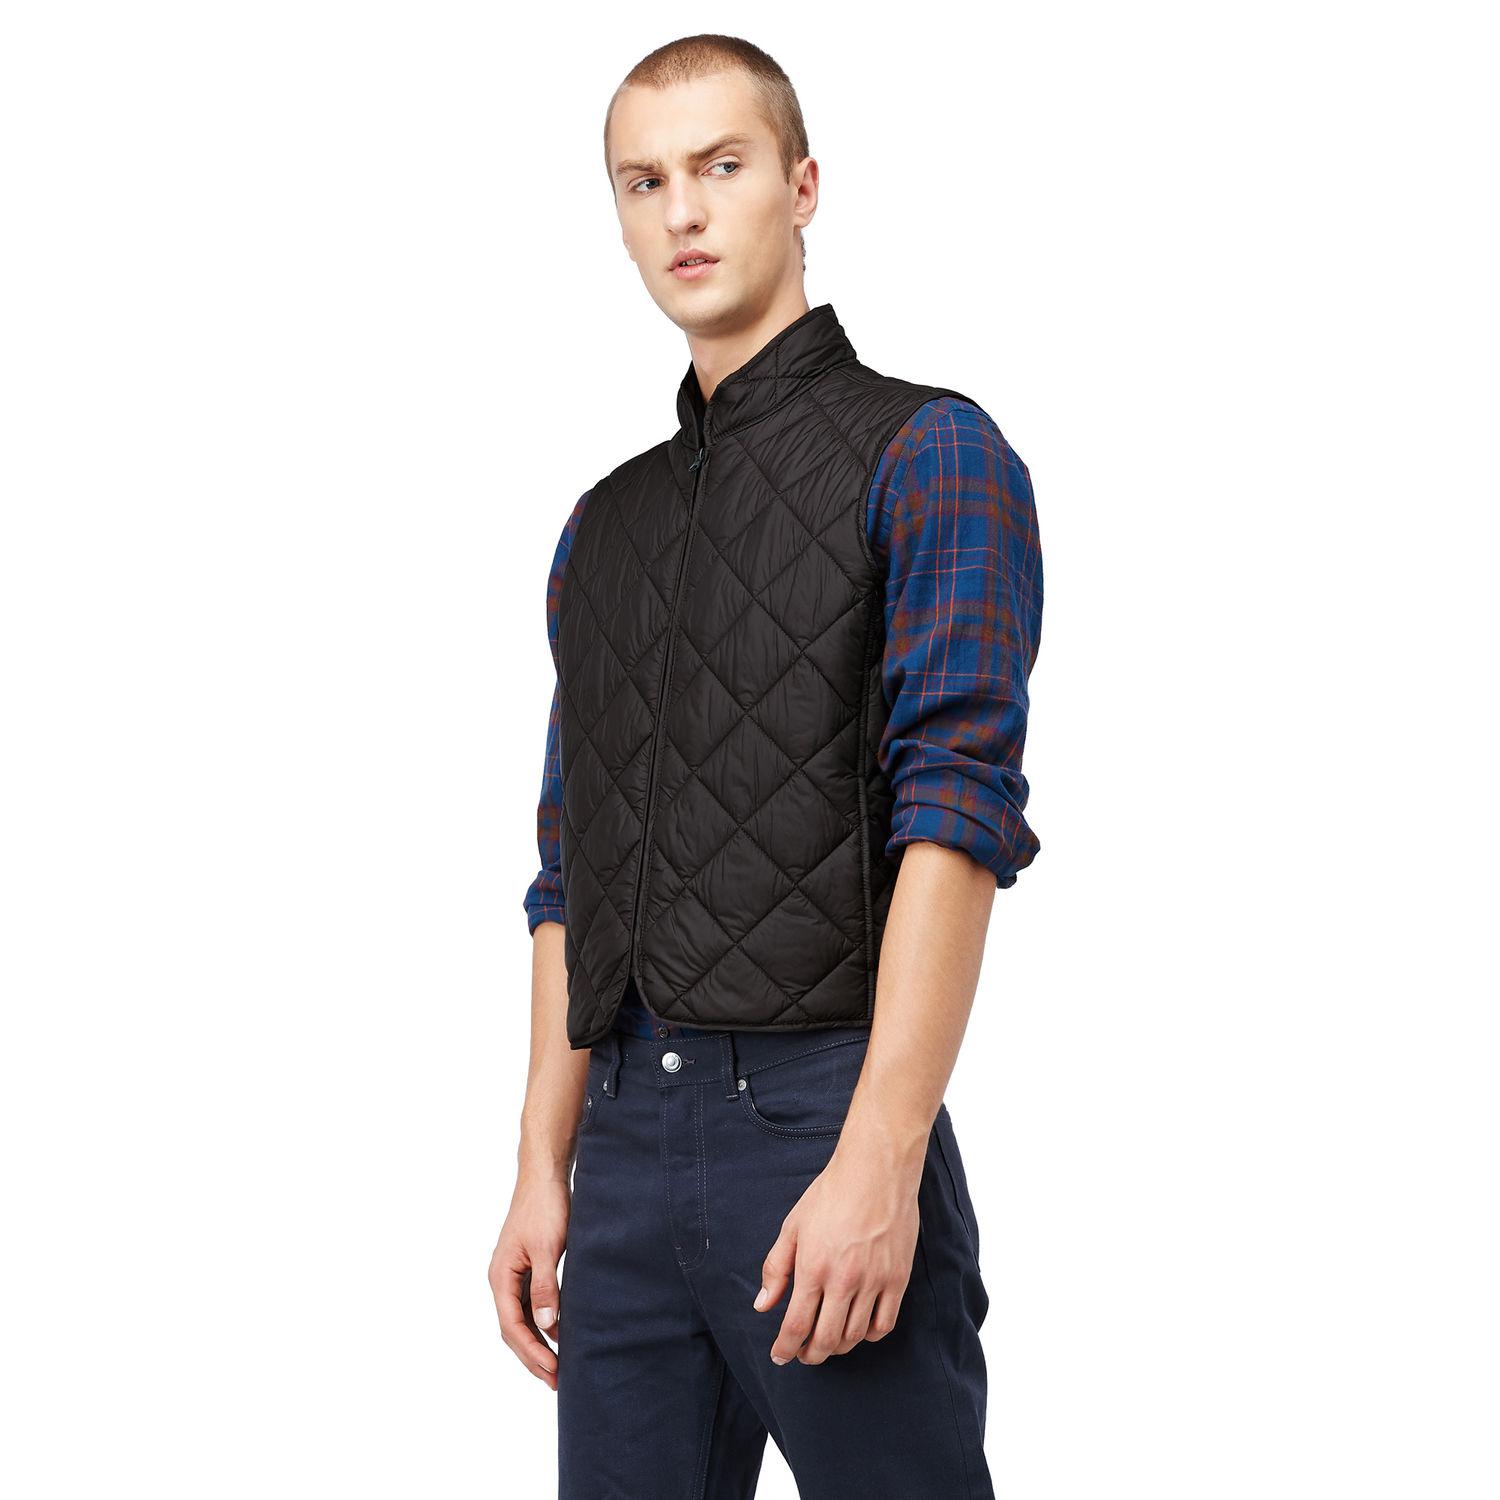 Baracuta Synthetic Quilted Vest in Faded Black (Black) for Men - Lyst